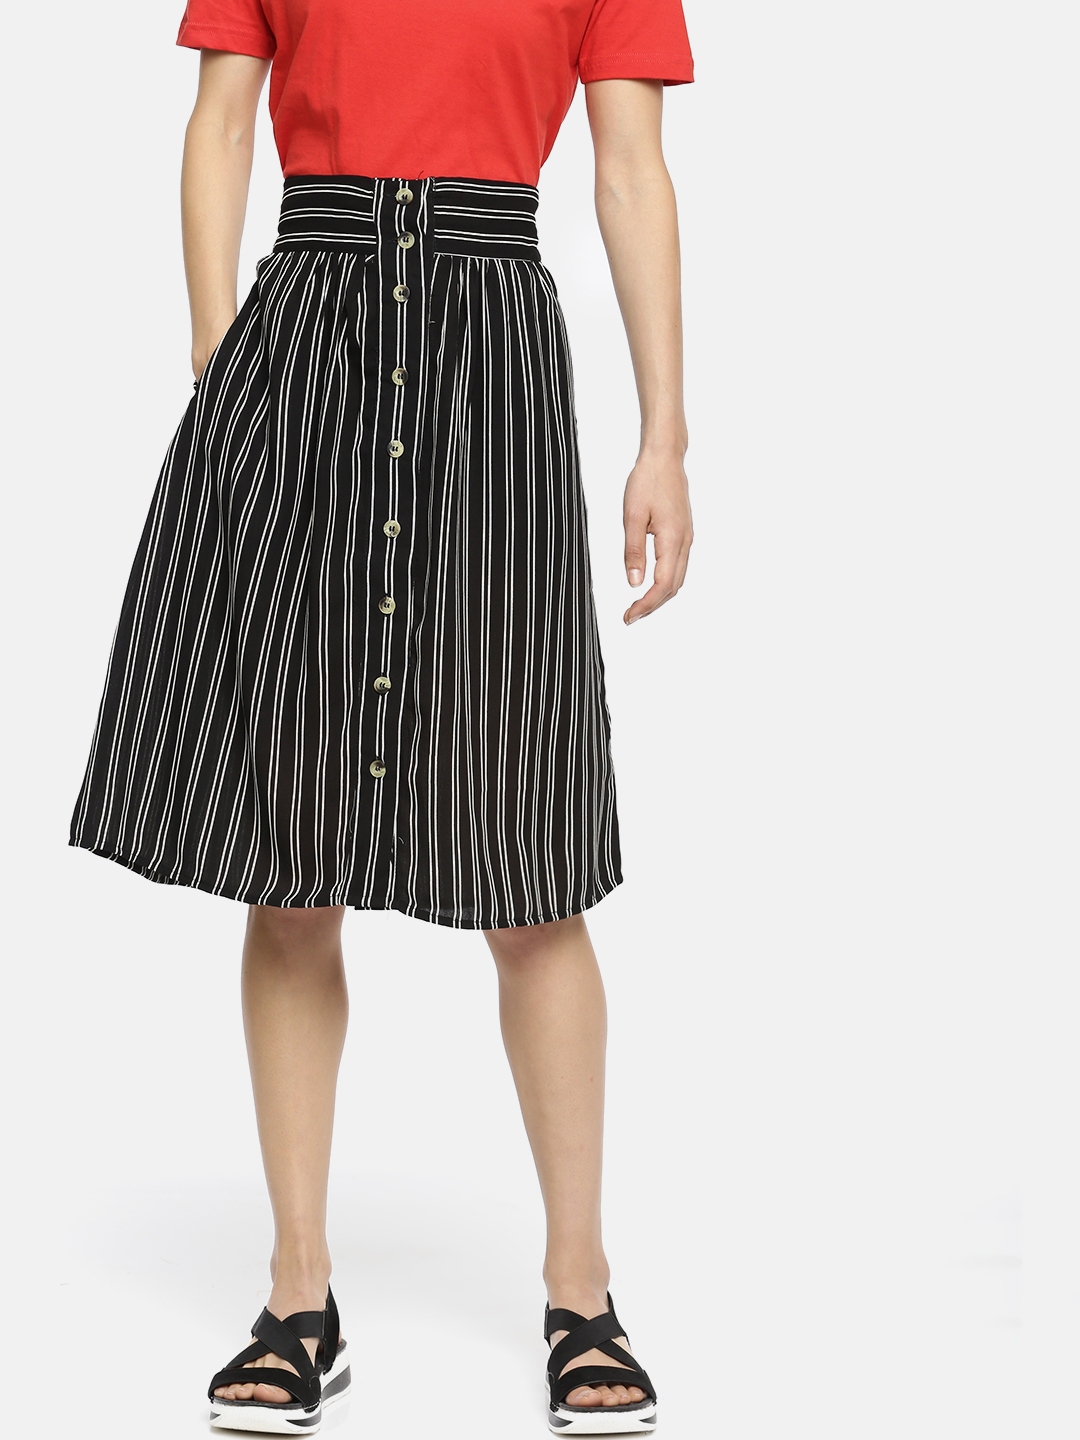 black and white striped a line skirt